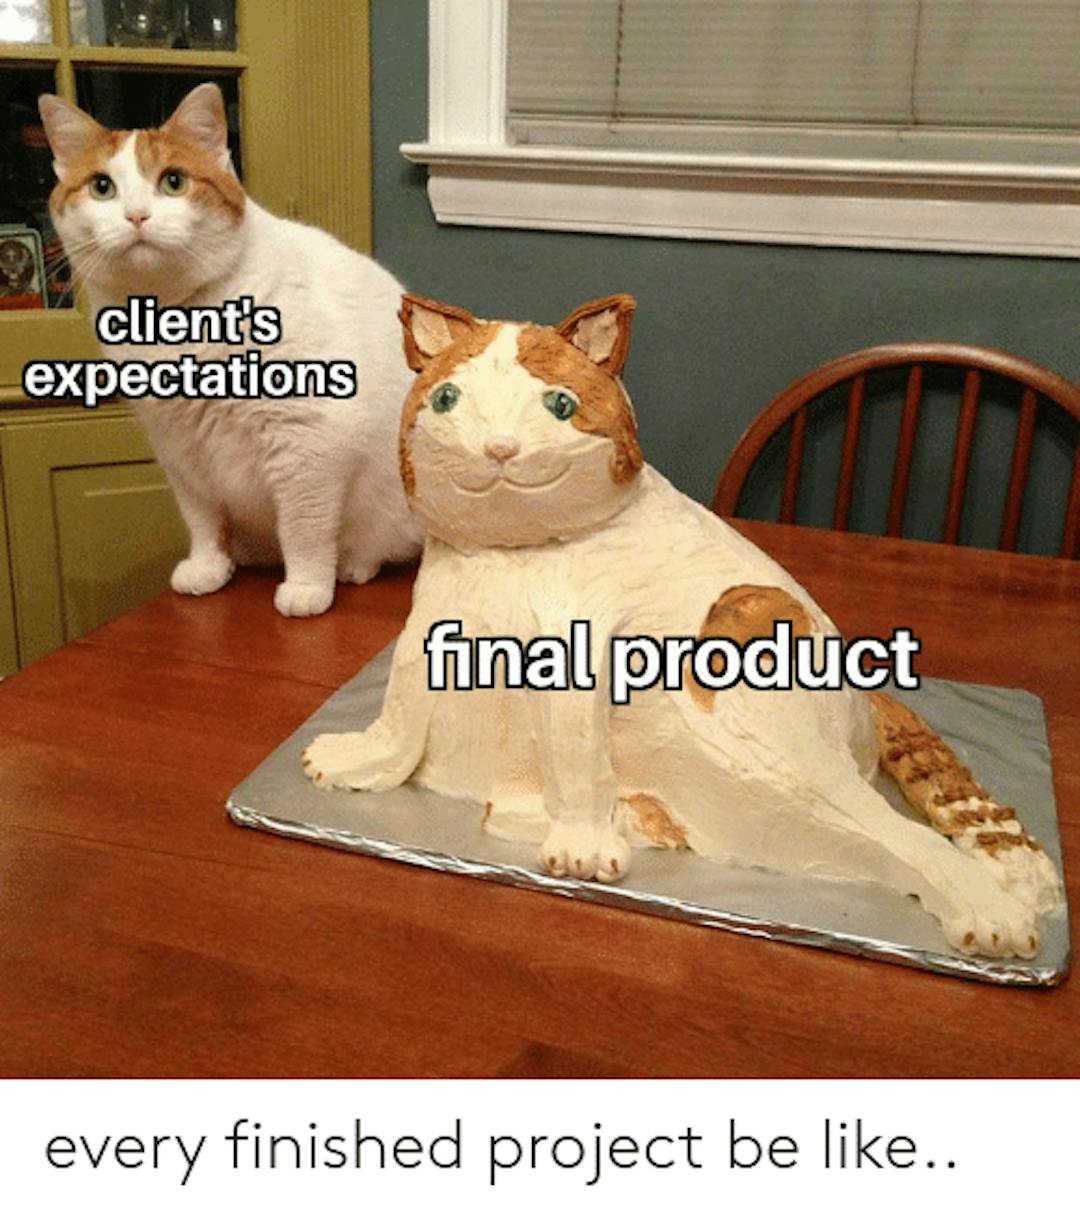 Source: https://me.me/i/clients-expectations-final-product-every-finished-project-be-like-bdf5413a01b943a6a83d2304fb68501f